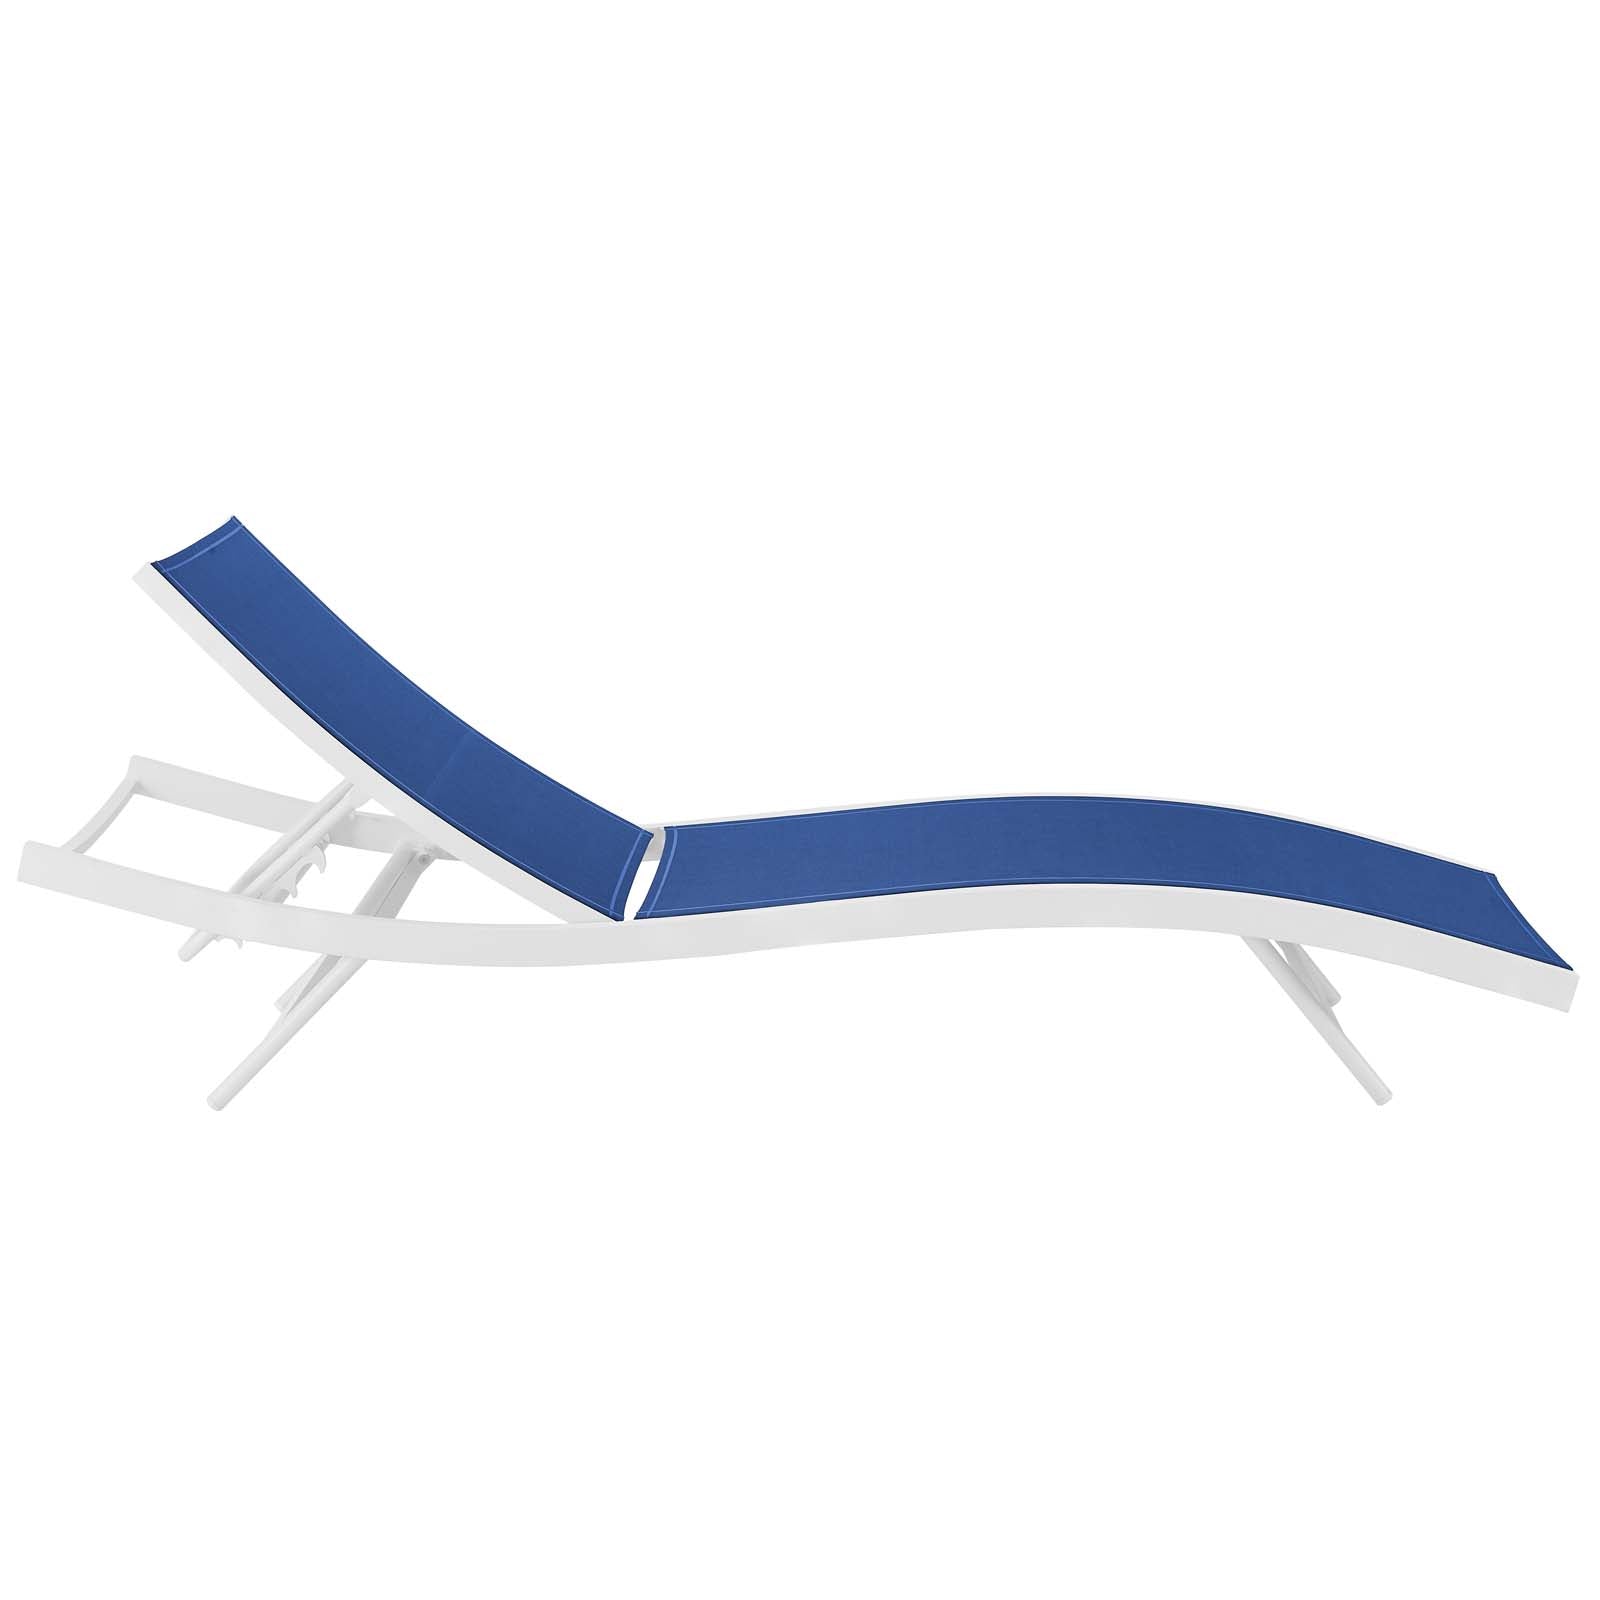 Modway Loungers - Glimpse Outdoor Patio Mesh Chaise Lounge Set of 2 White Navy